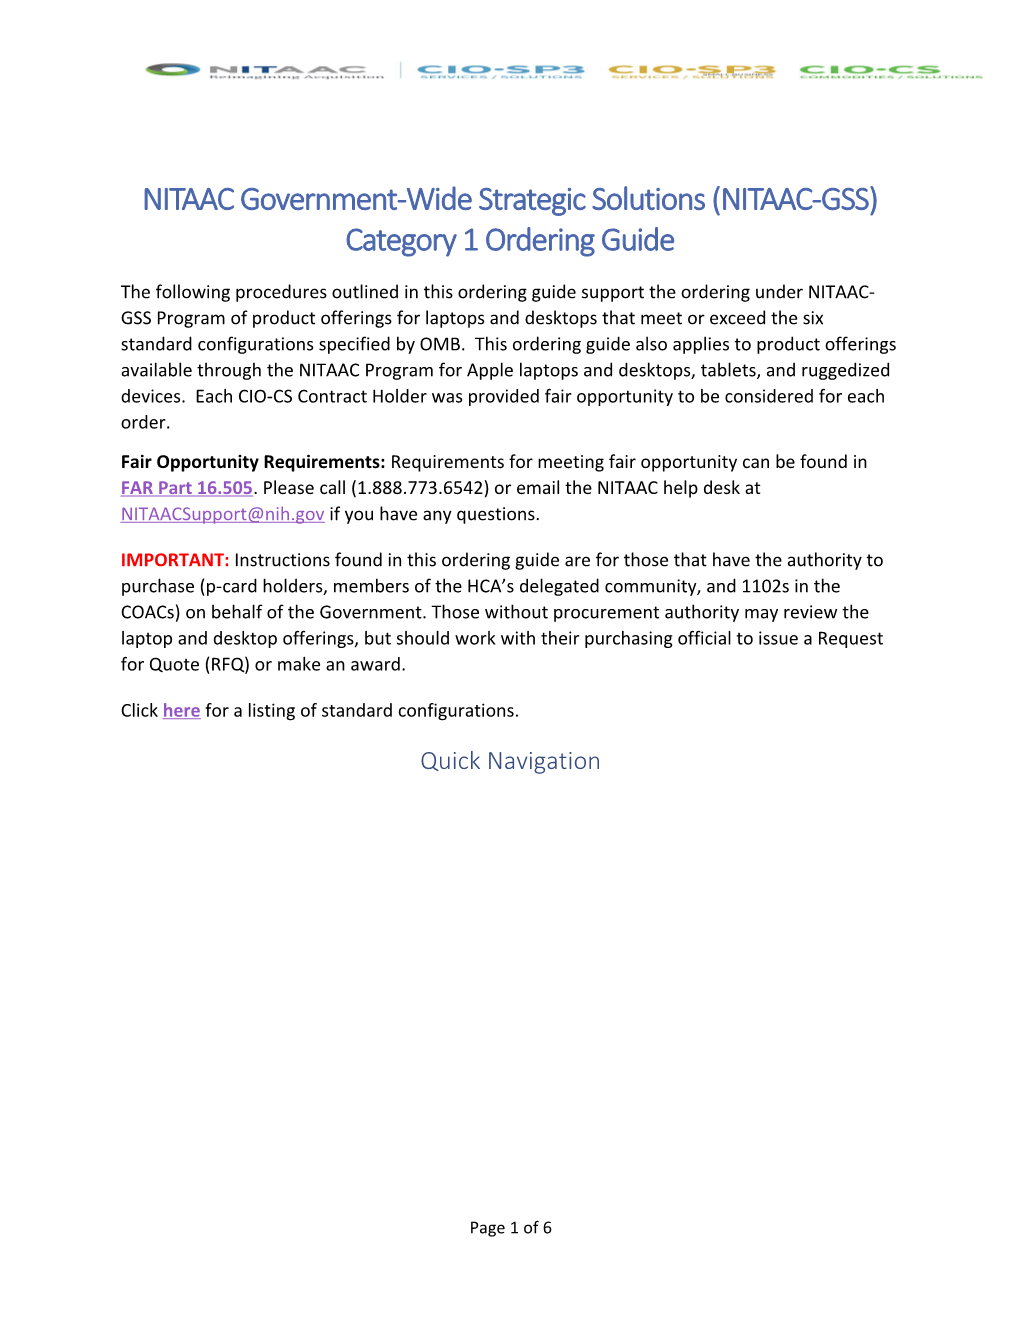 NITAAC Government-Wide Strategic Solutions (NITAAC-GSS)